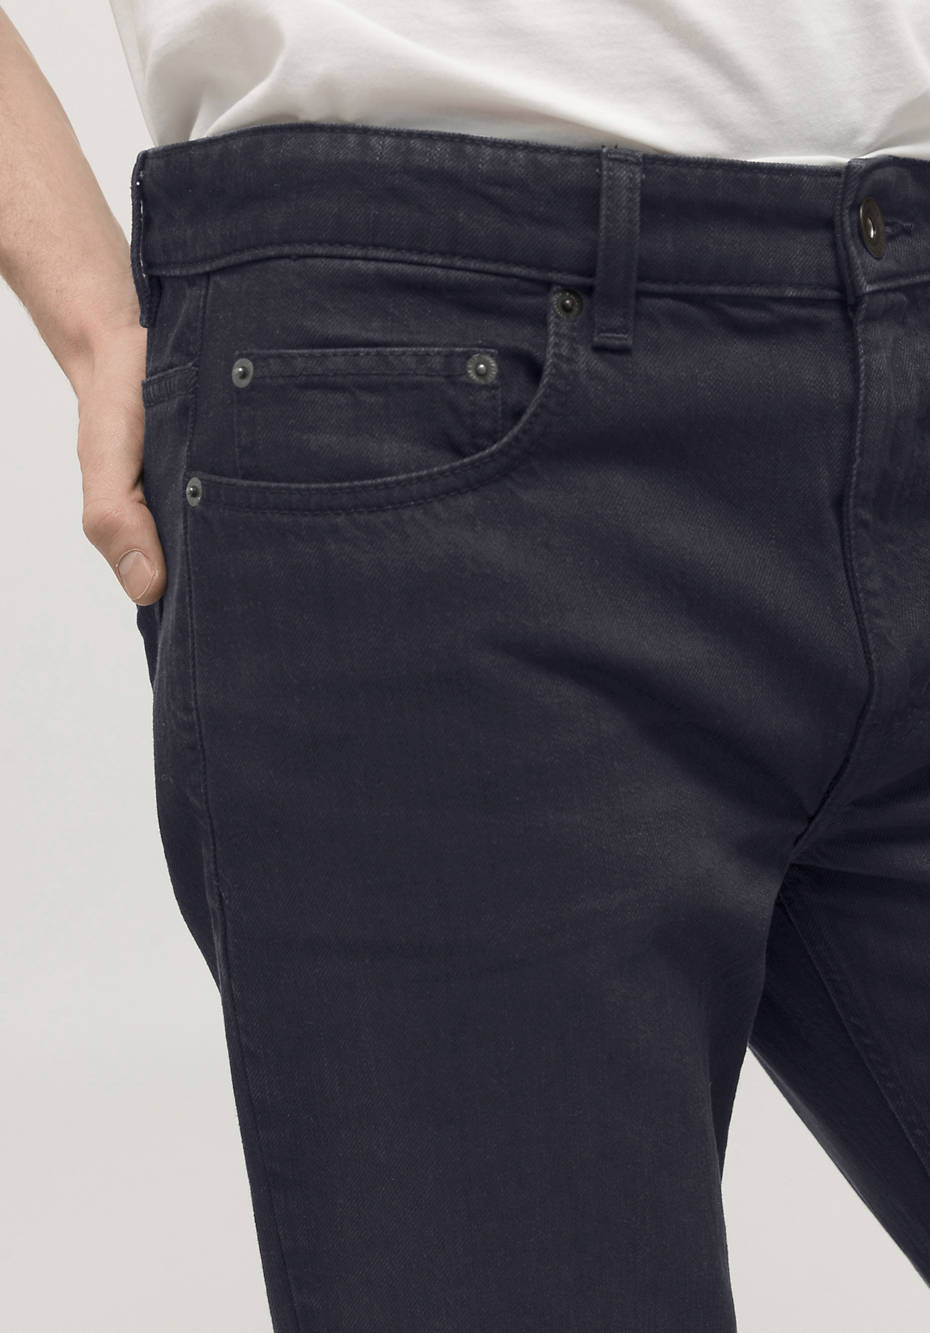 Over Dye Jeans Max Tapered Fit made of pure organic denim